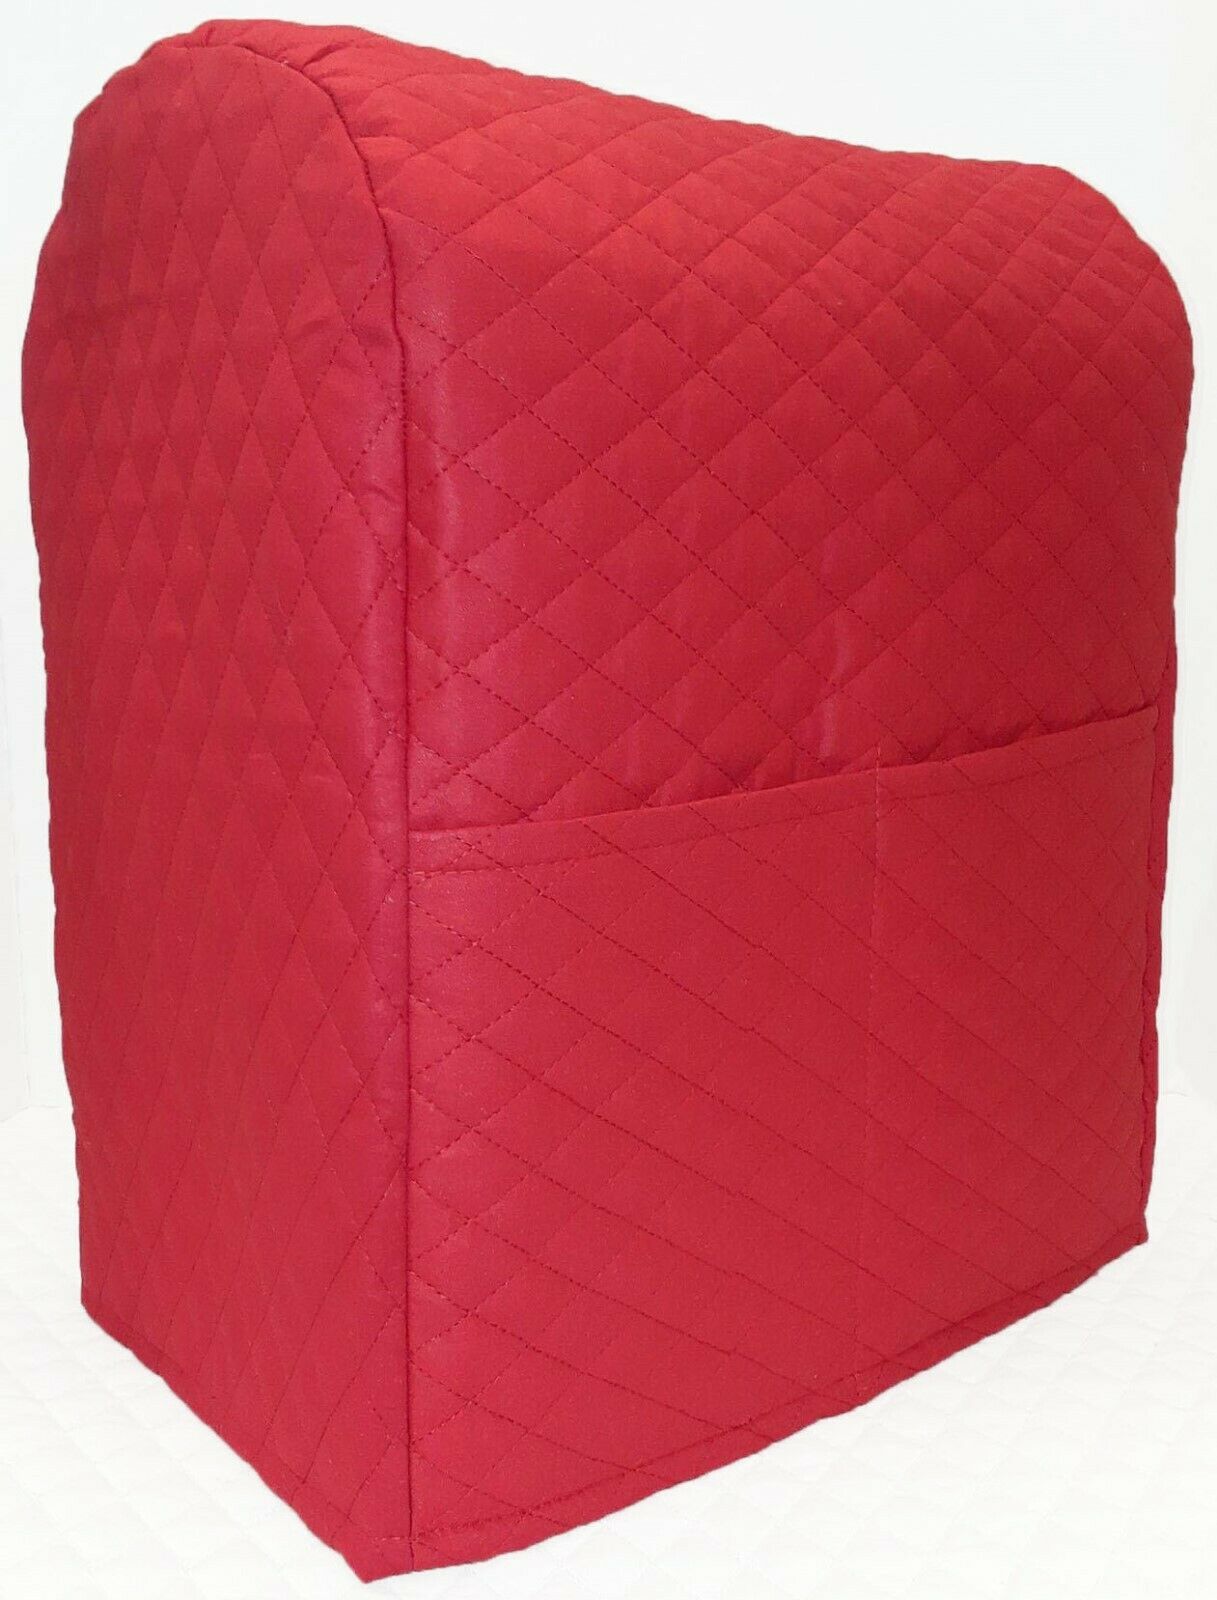 Quilted Cover Compatible with Kitchenaid Stand Mixer by Penny's Needful Things (Red, All Lift Bowl Models)